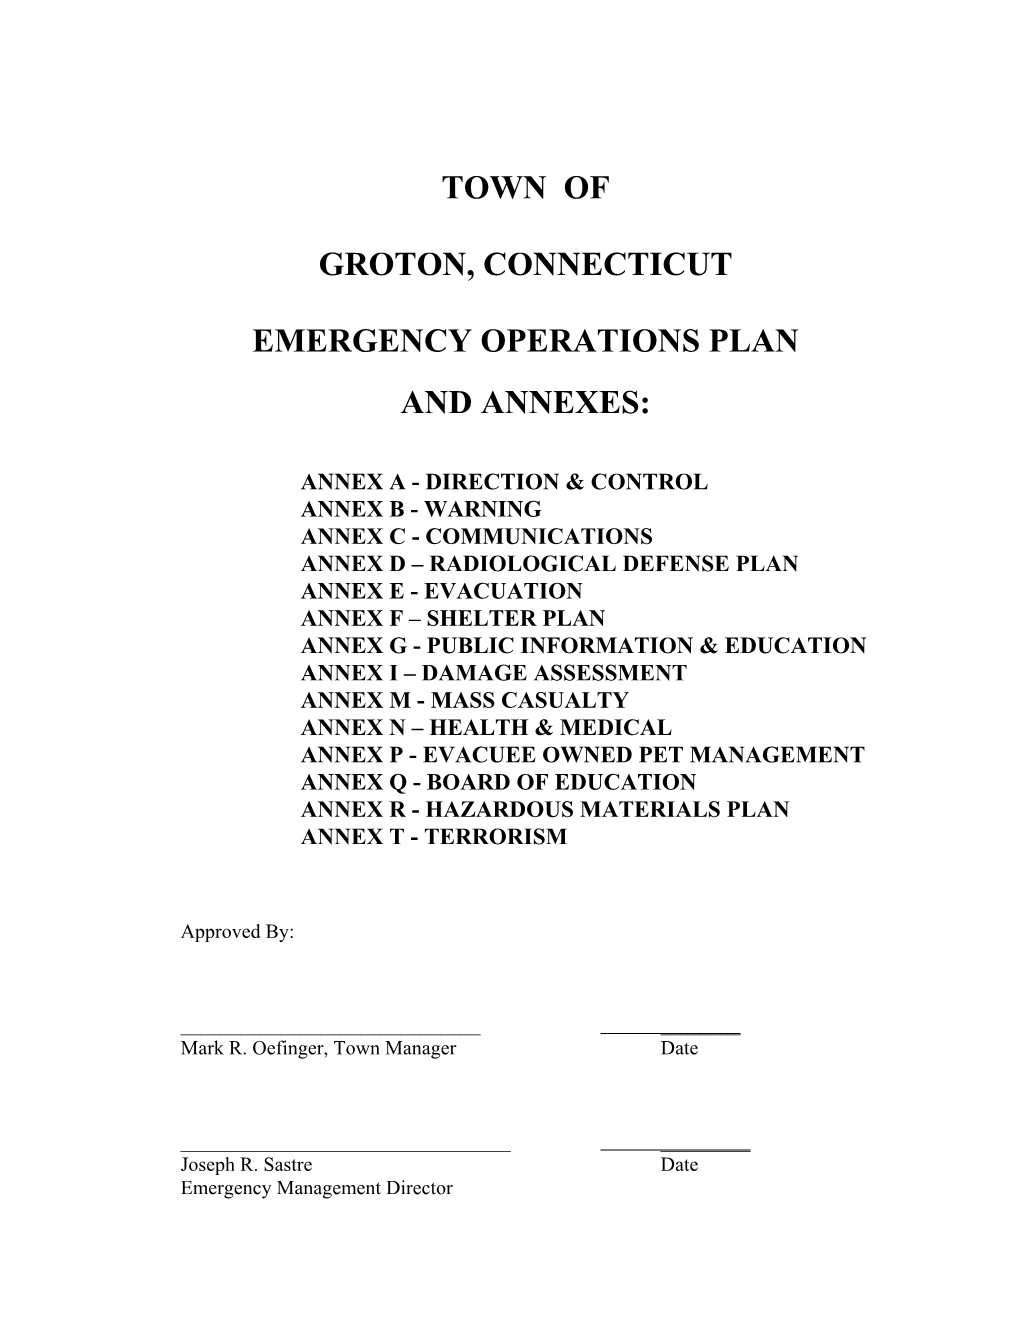 Town of Groton, Connecticut Emergency Operations Plan and Annexes